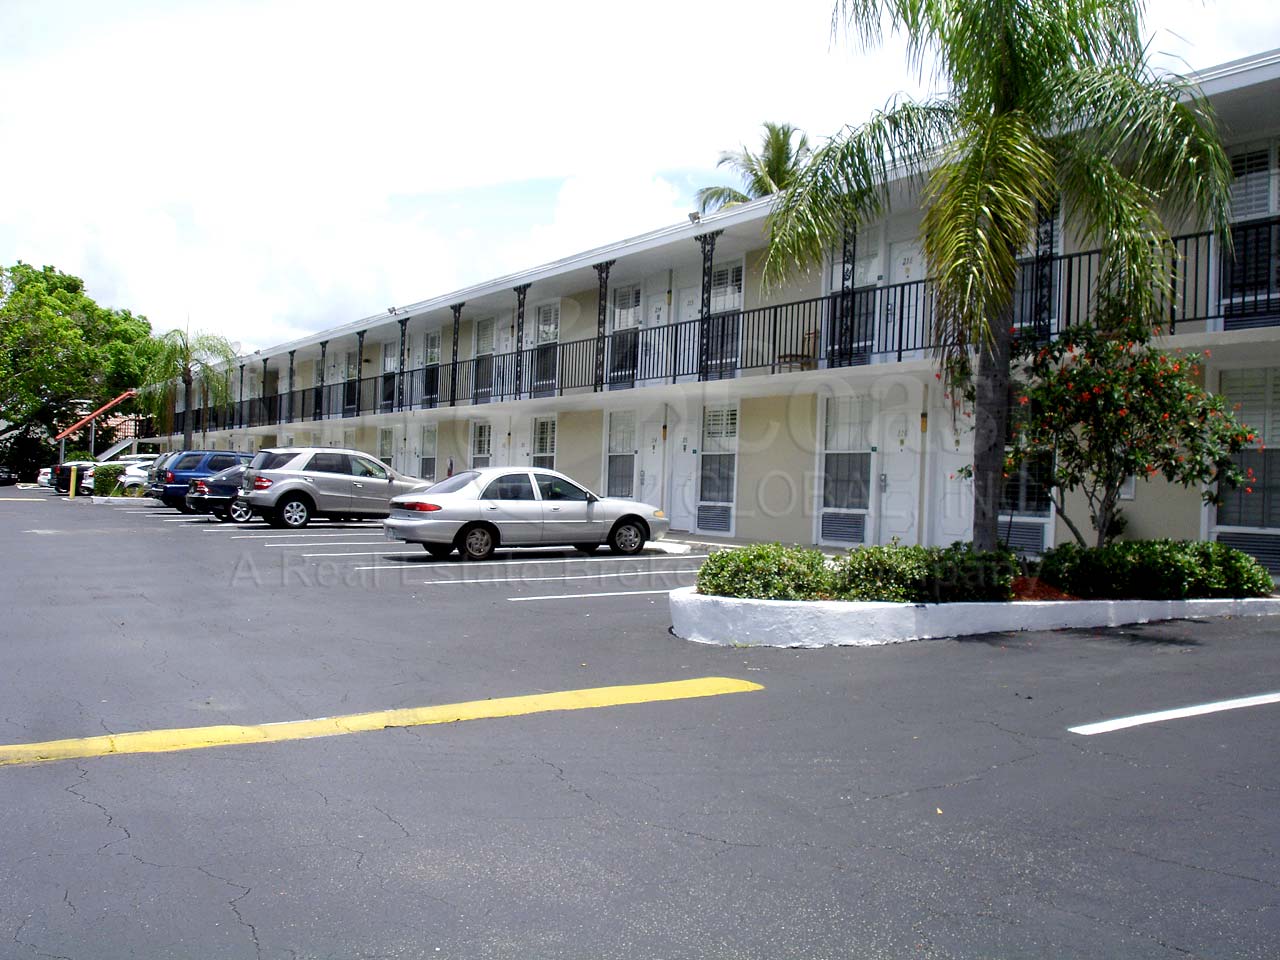 Gulfcoast Inn Of Naples Uncovered Parking